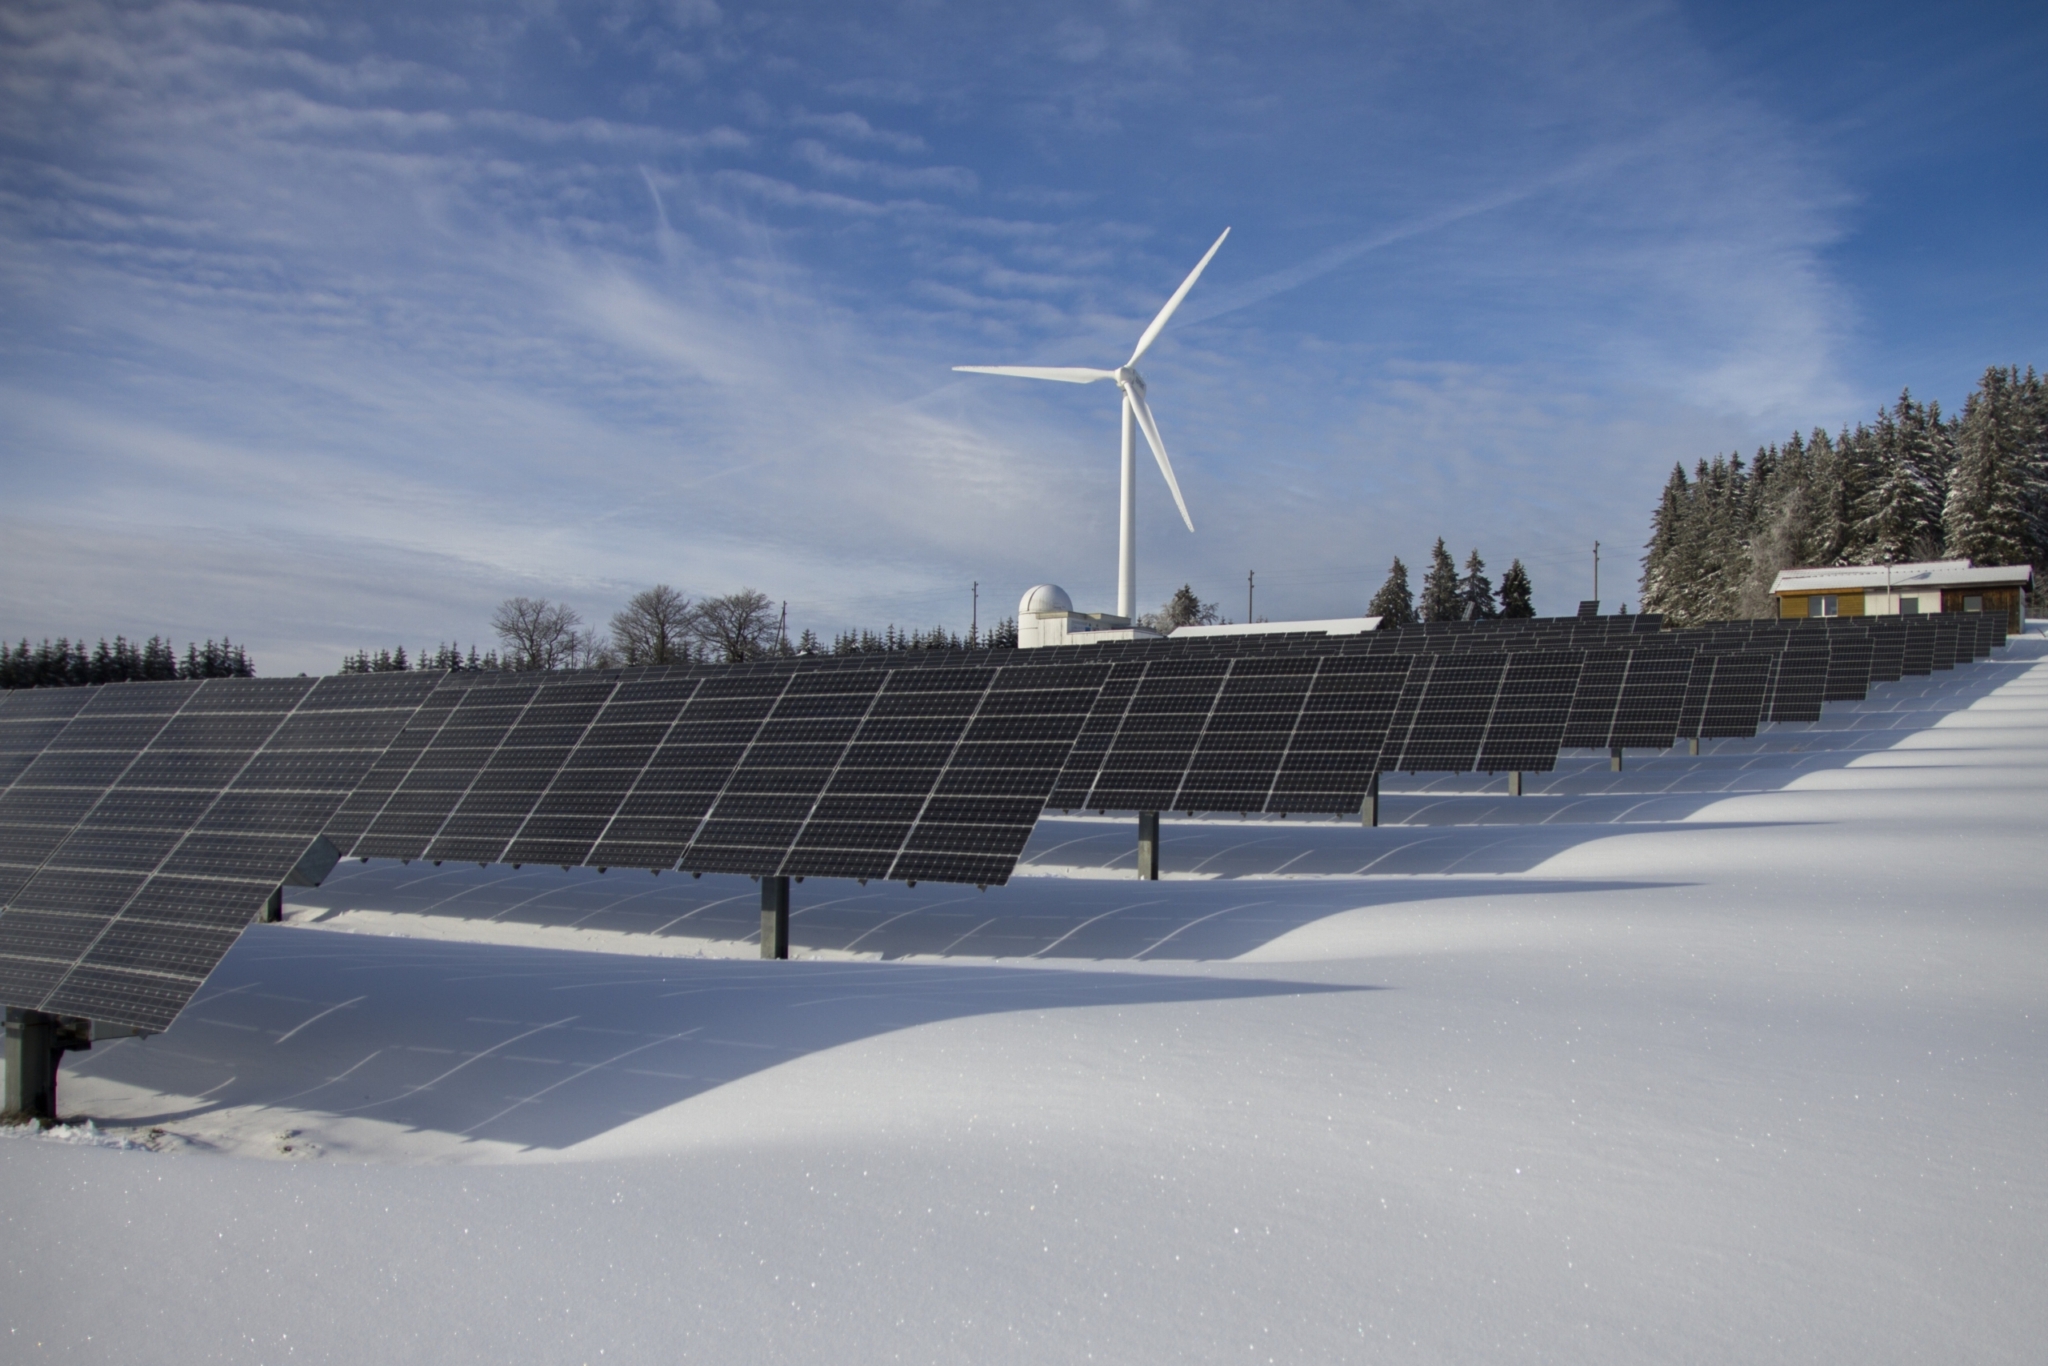 Solar panels on snow with windmill under clear day sky as a way of implementing sustainable business practices.